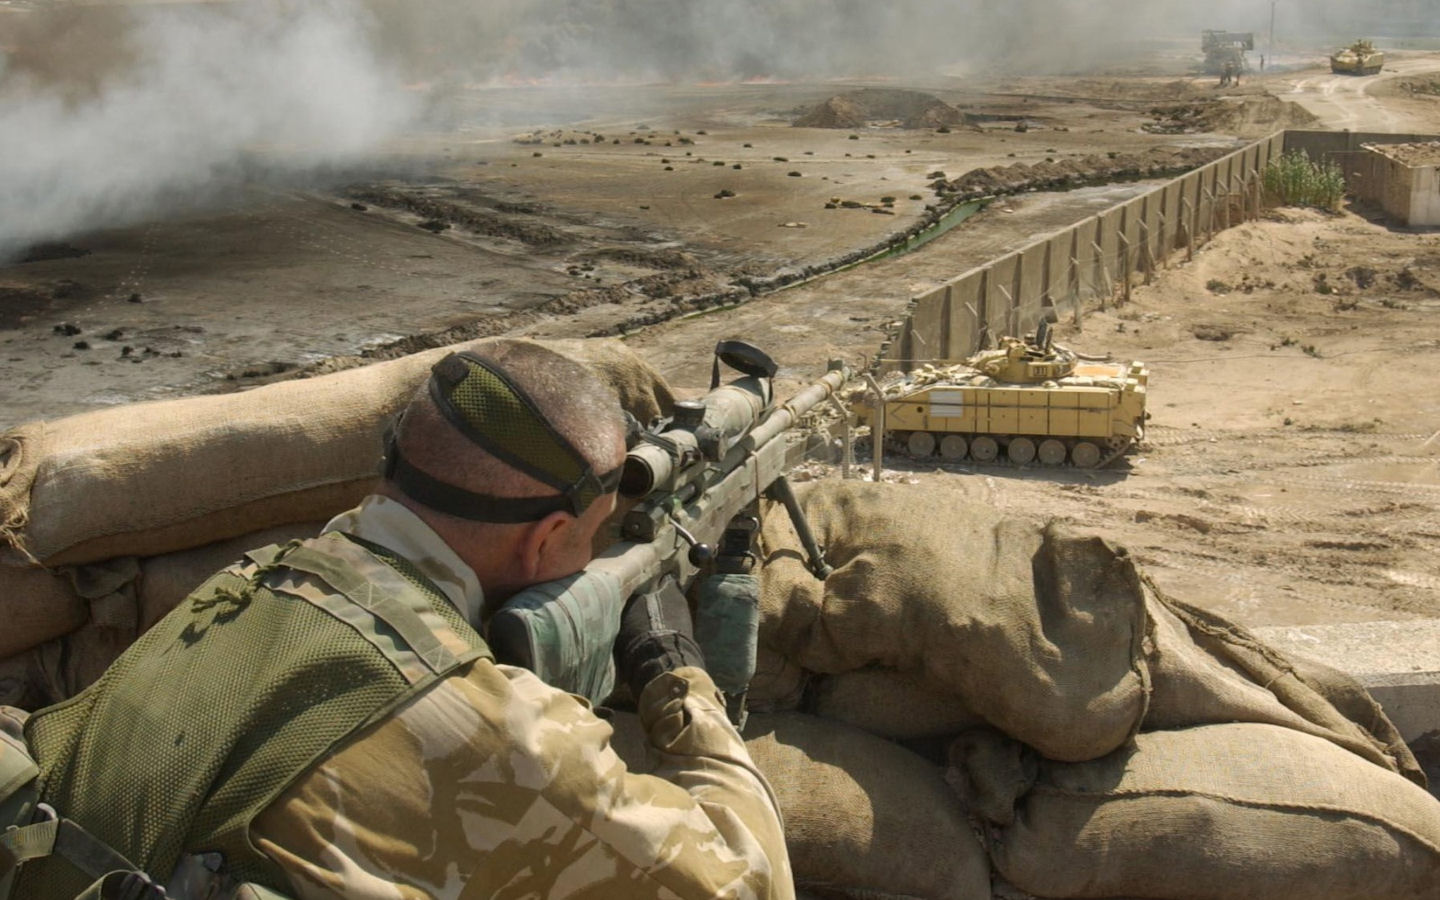 Us Army Sniper 8526 Hd Wallpapers in War n Army   Imagescicom